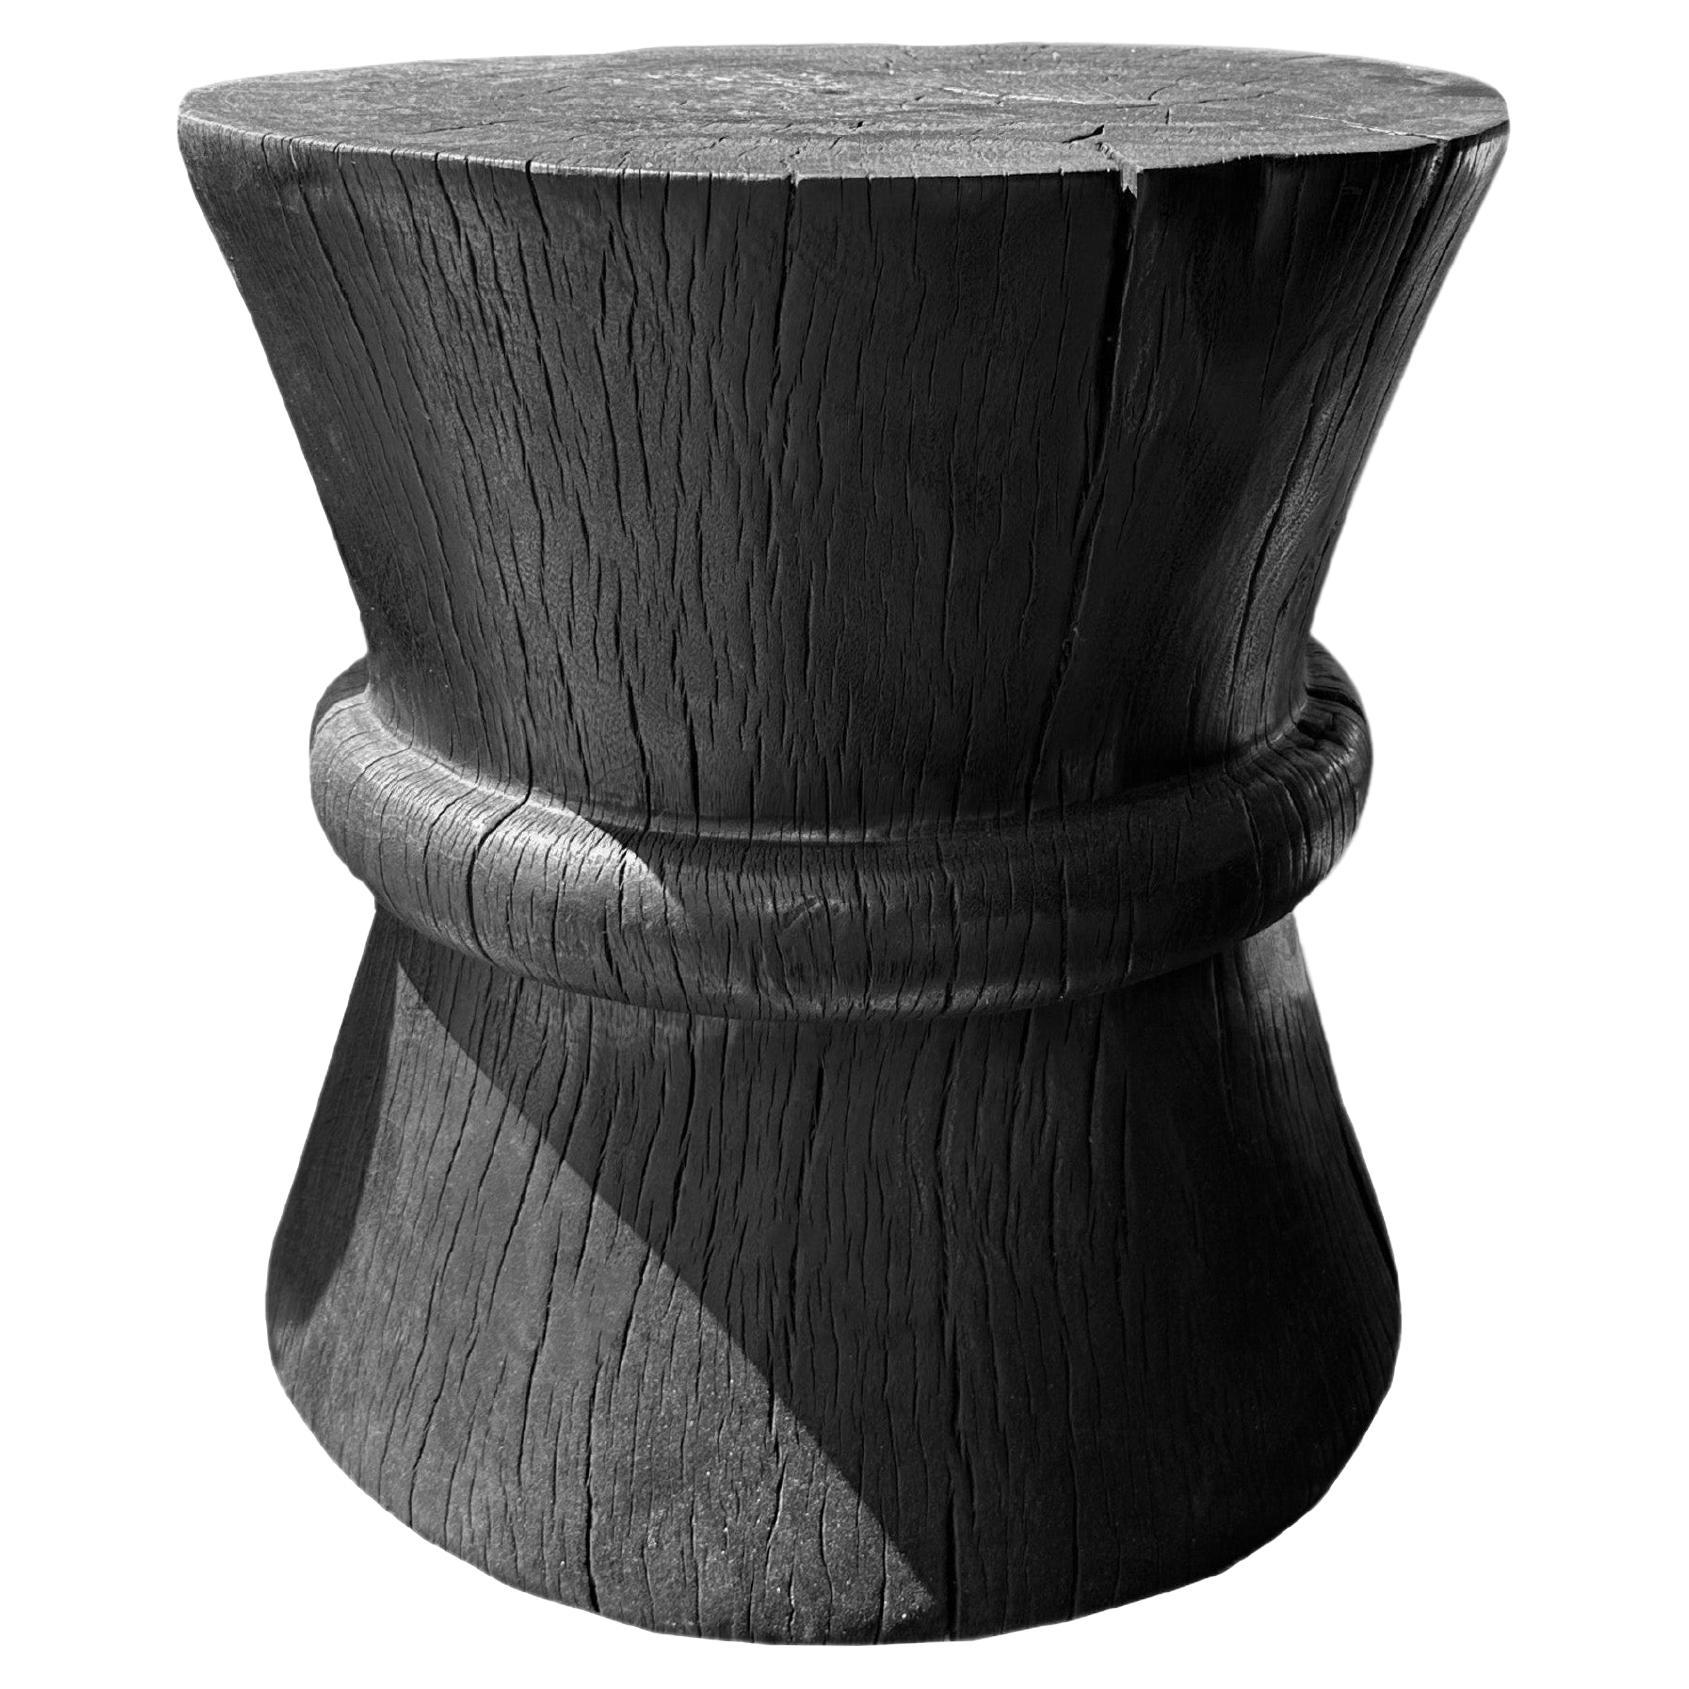 Sculptural Solid Tamarind Wood Table, Modern Organic, Burnt Finish For Sale